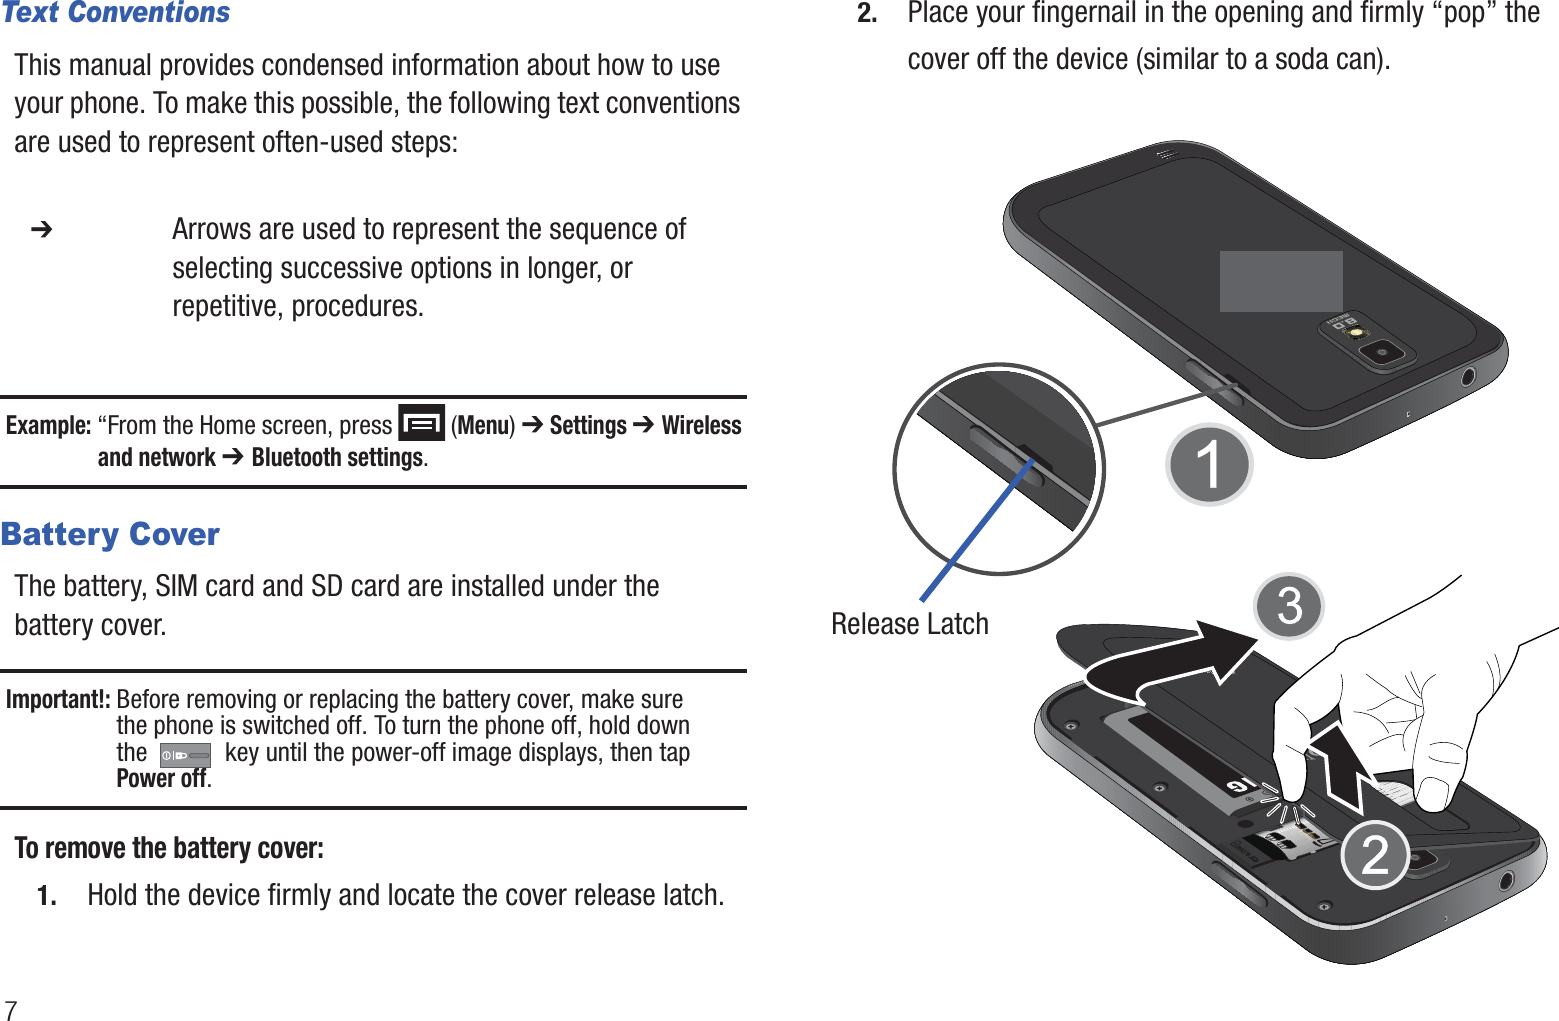 7Text ConventionsThis manual provides condensed information about how to use your phone. To make this possible, the following text conventions are used to represent often-used steps:Example: “From the Home screen, press   (Menu) ➔ Settings ➔ Wireless and network ➔ Bluetooth settings.Battery CoverThe battery, SIM card and SD card are installed under the battery cover.Important!: Before removing or replacing the battery cover, make sure the phone is switched off. To turn the phone off, hold down the   key until the power-off image displays, then tapPower off.To remove the battery cover:1. Hold the device firmly and locate the cover release latch.2. Place your fingernail in the opening and firmly “pop” the cover off the device (similar to a soda can).   ➔ Arrows are used to represent the sequence of selecting successive options in longer, or repetitive, procedures.Release Latch